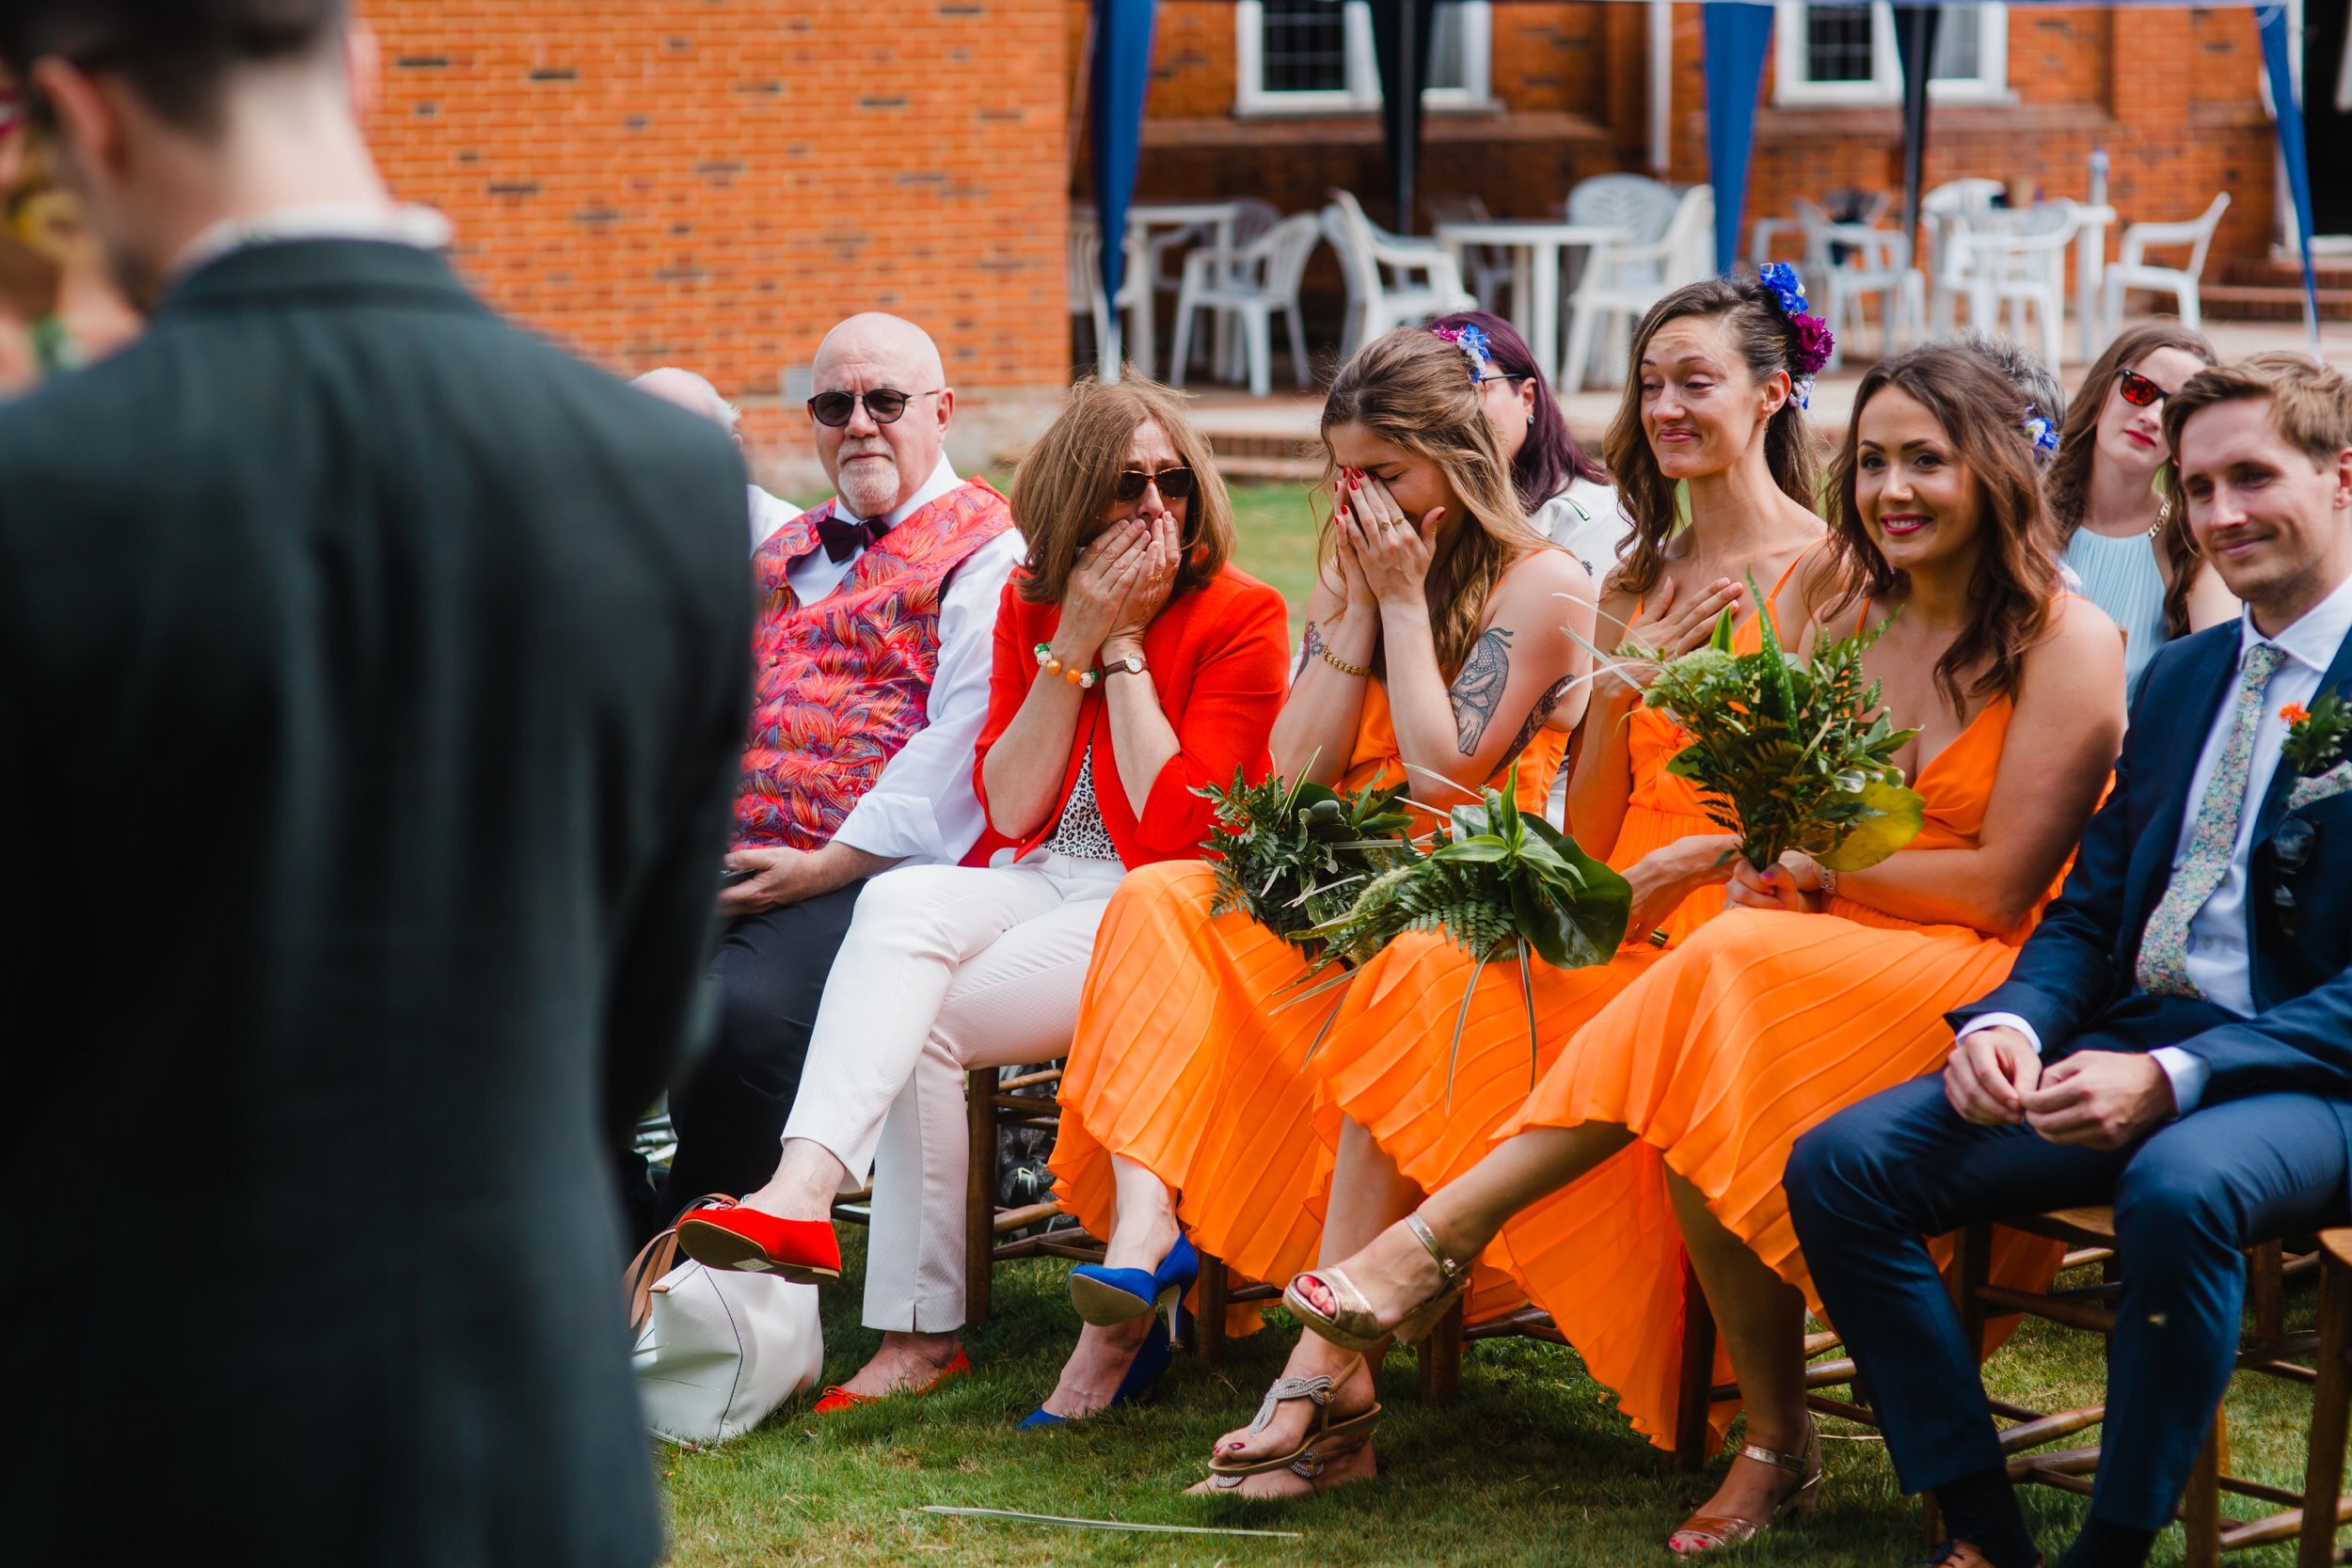 bridesmaids and family get emotional during a wedding ceremony